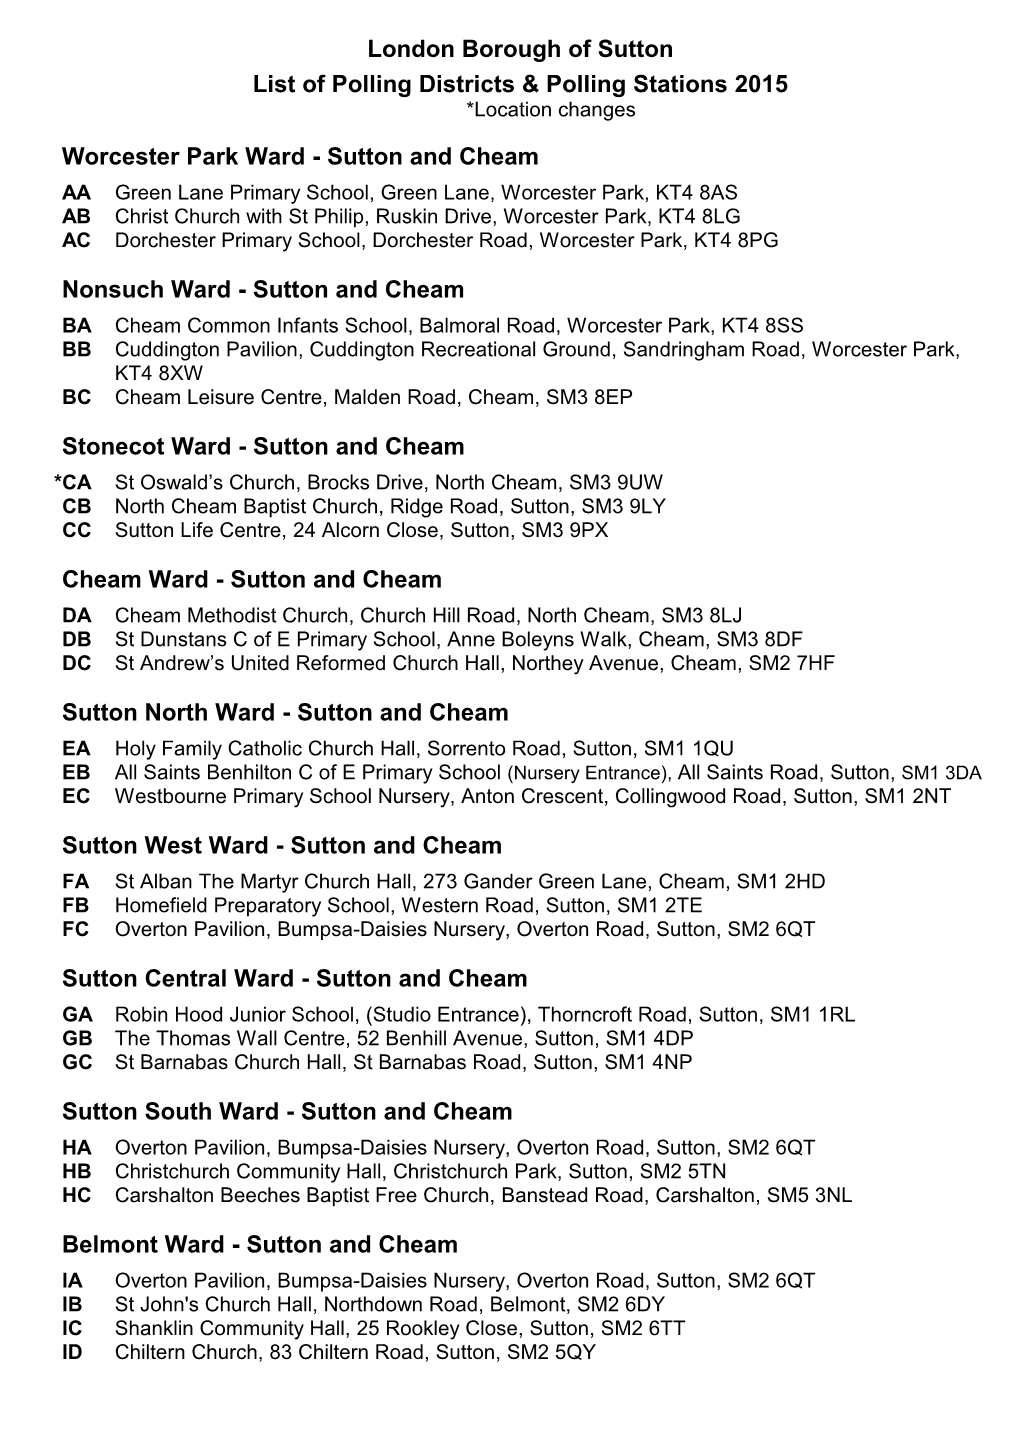 London Borough of Sutton List of Polling Districts & Polling Stations 2015 Worcester Park Ward